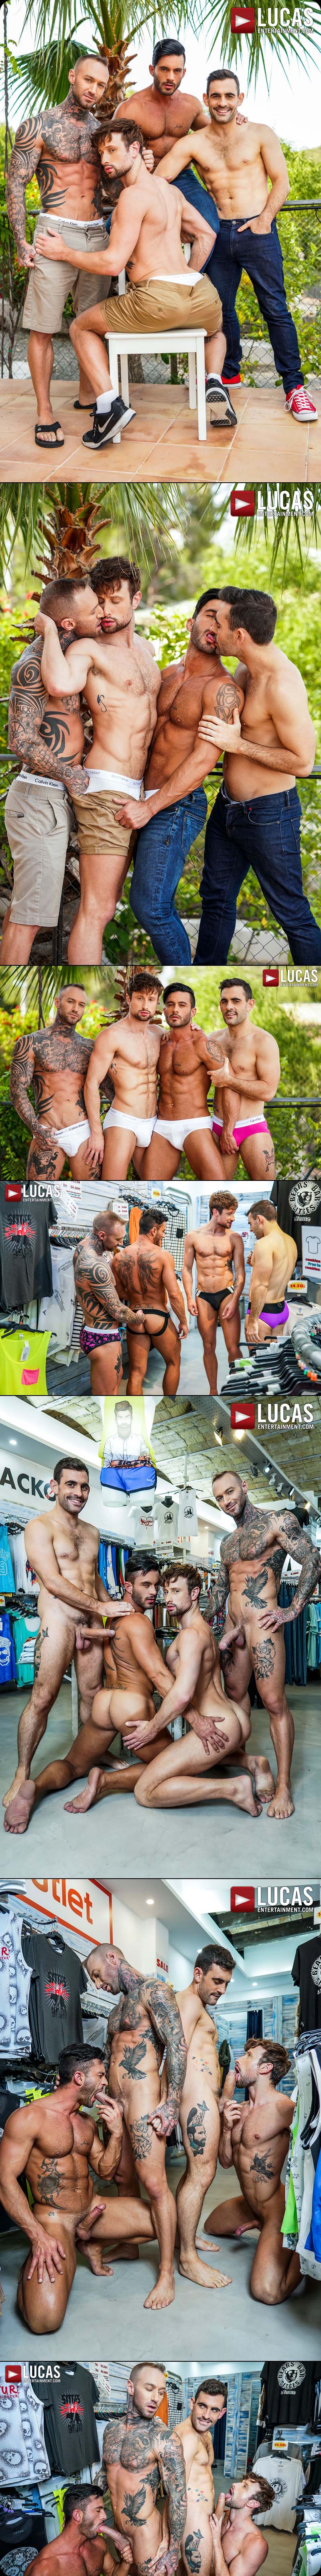 Fucking Show-Offs, Scene Three (Max Arion, Dylan James, Andy Star and Drew Dixon's Hot, Sweaty Retail Trip) at LucasEntertainment